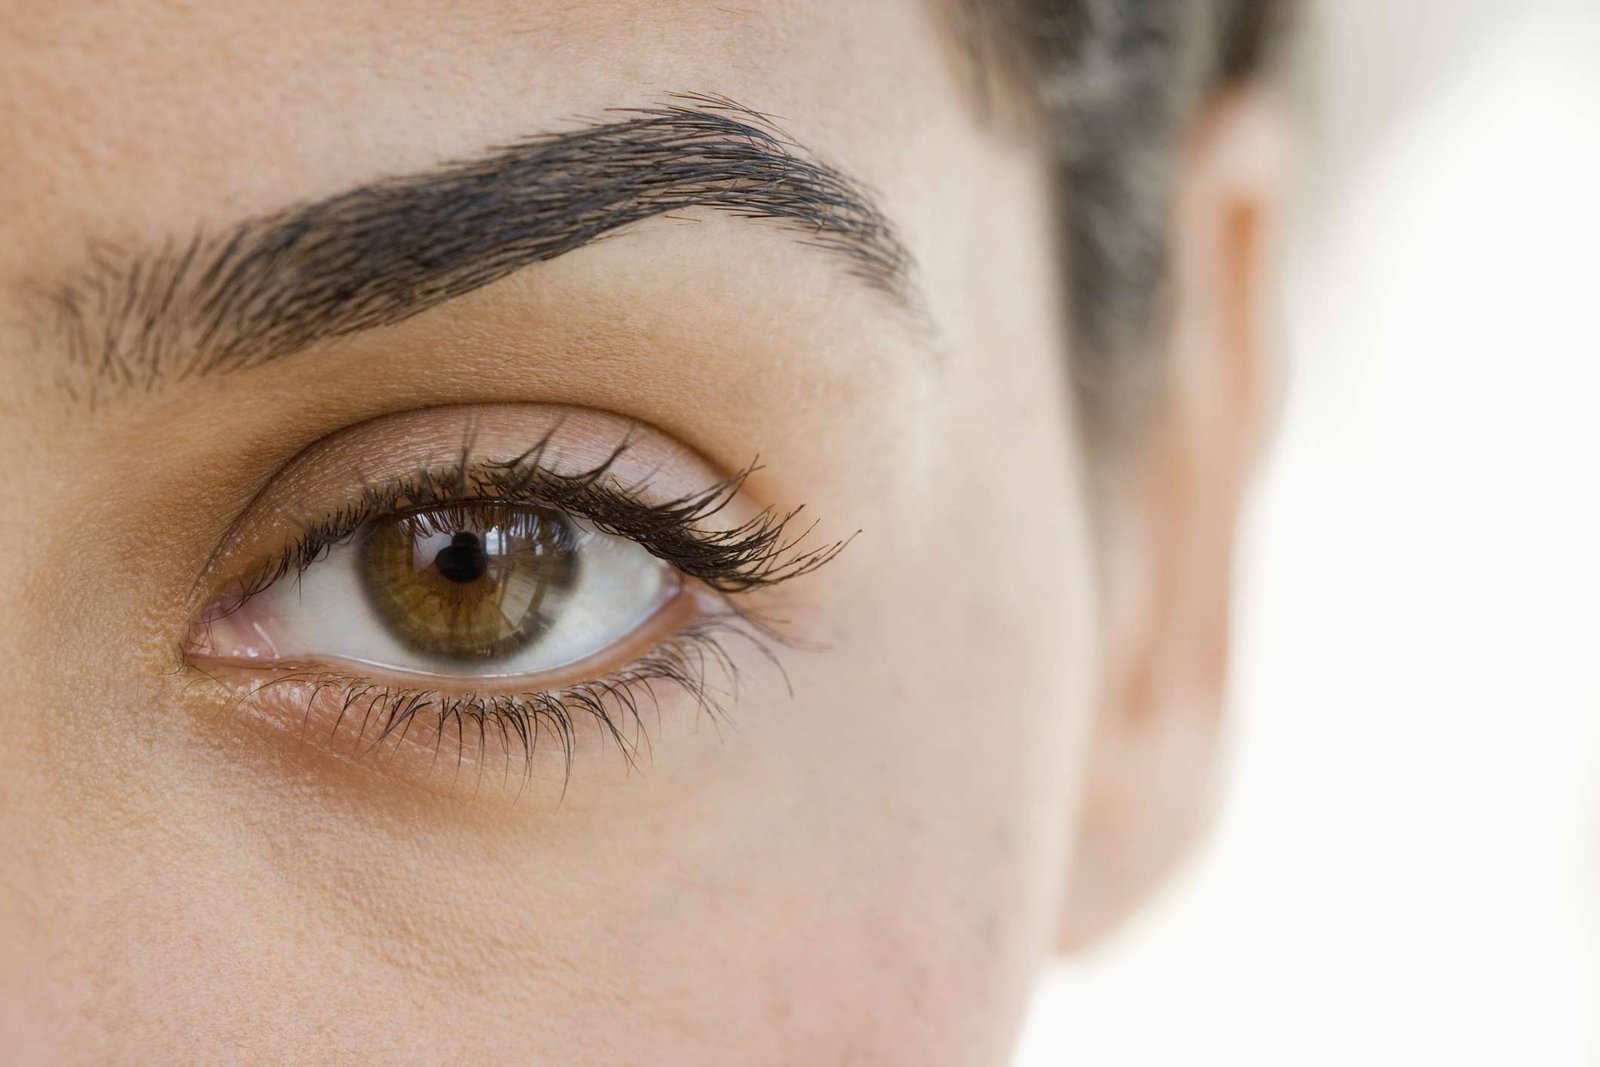 Stressed over parse and sparse eyebrows?